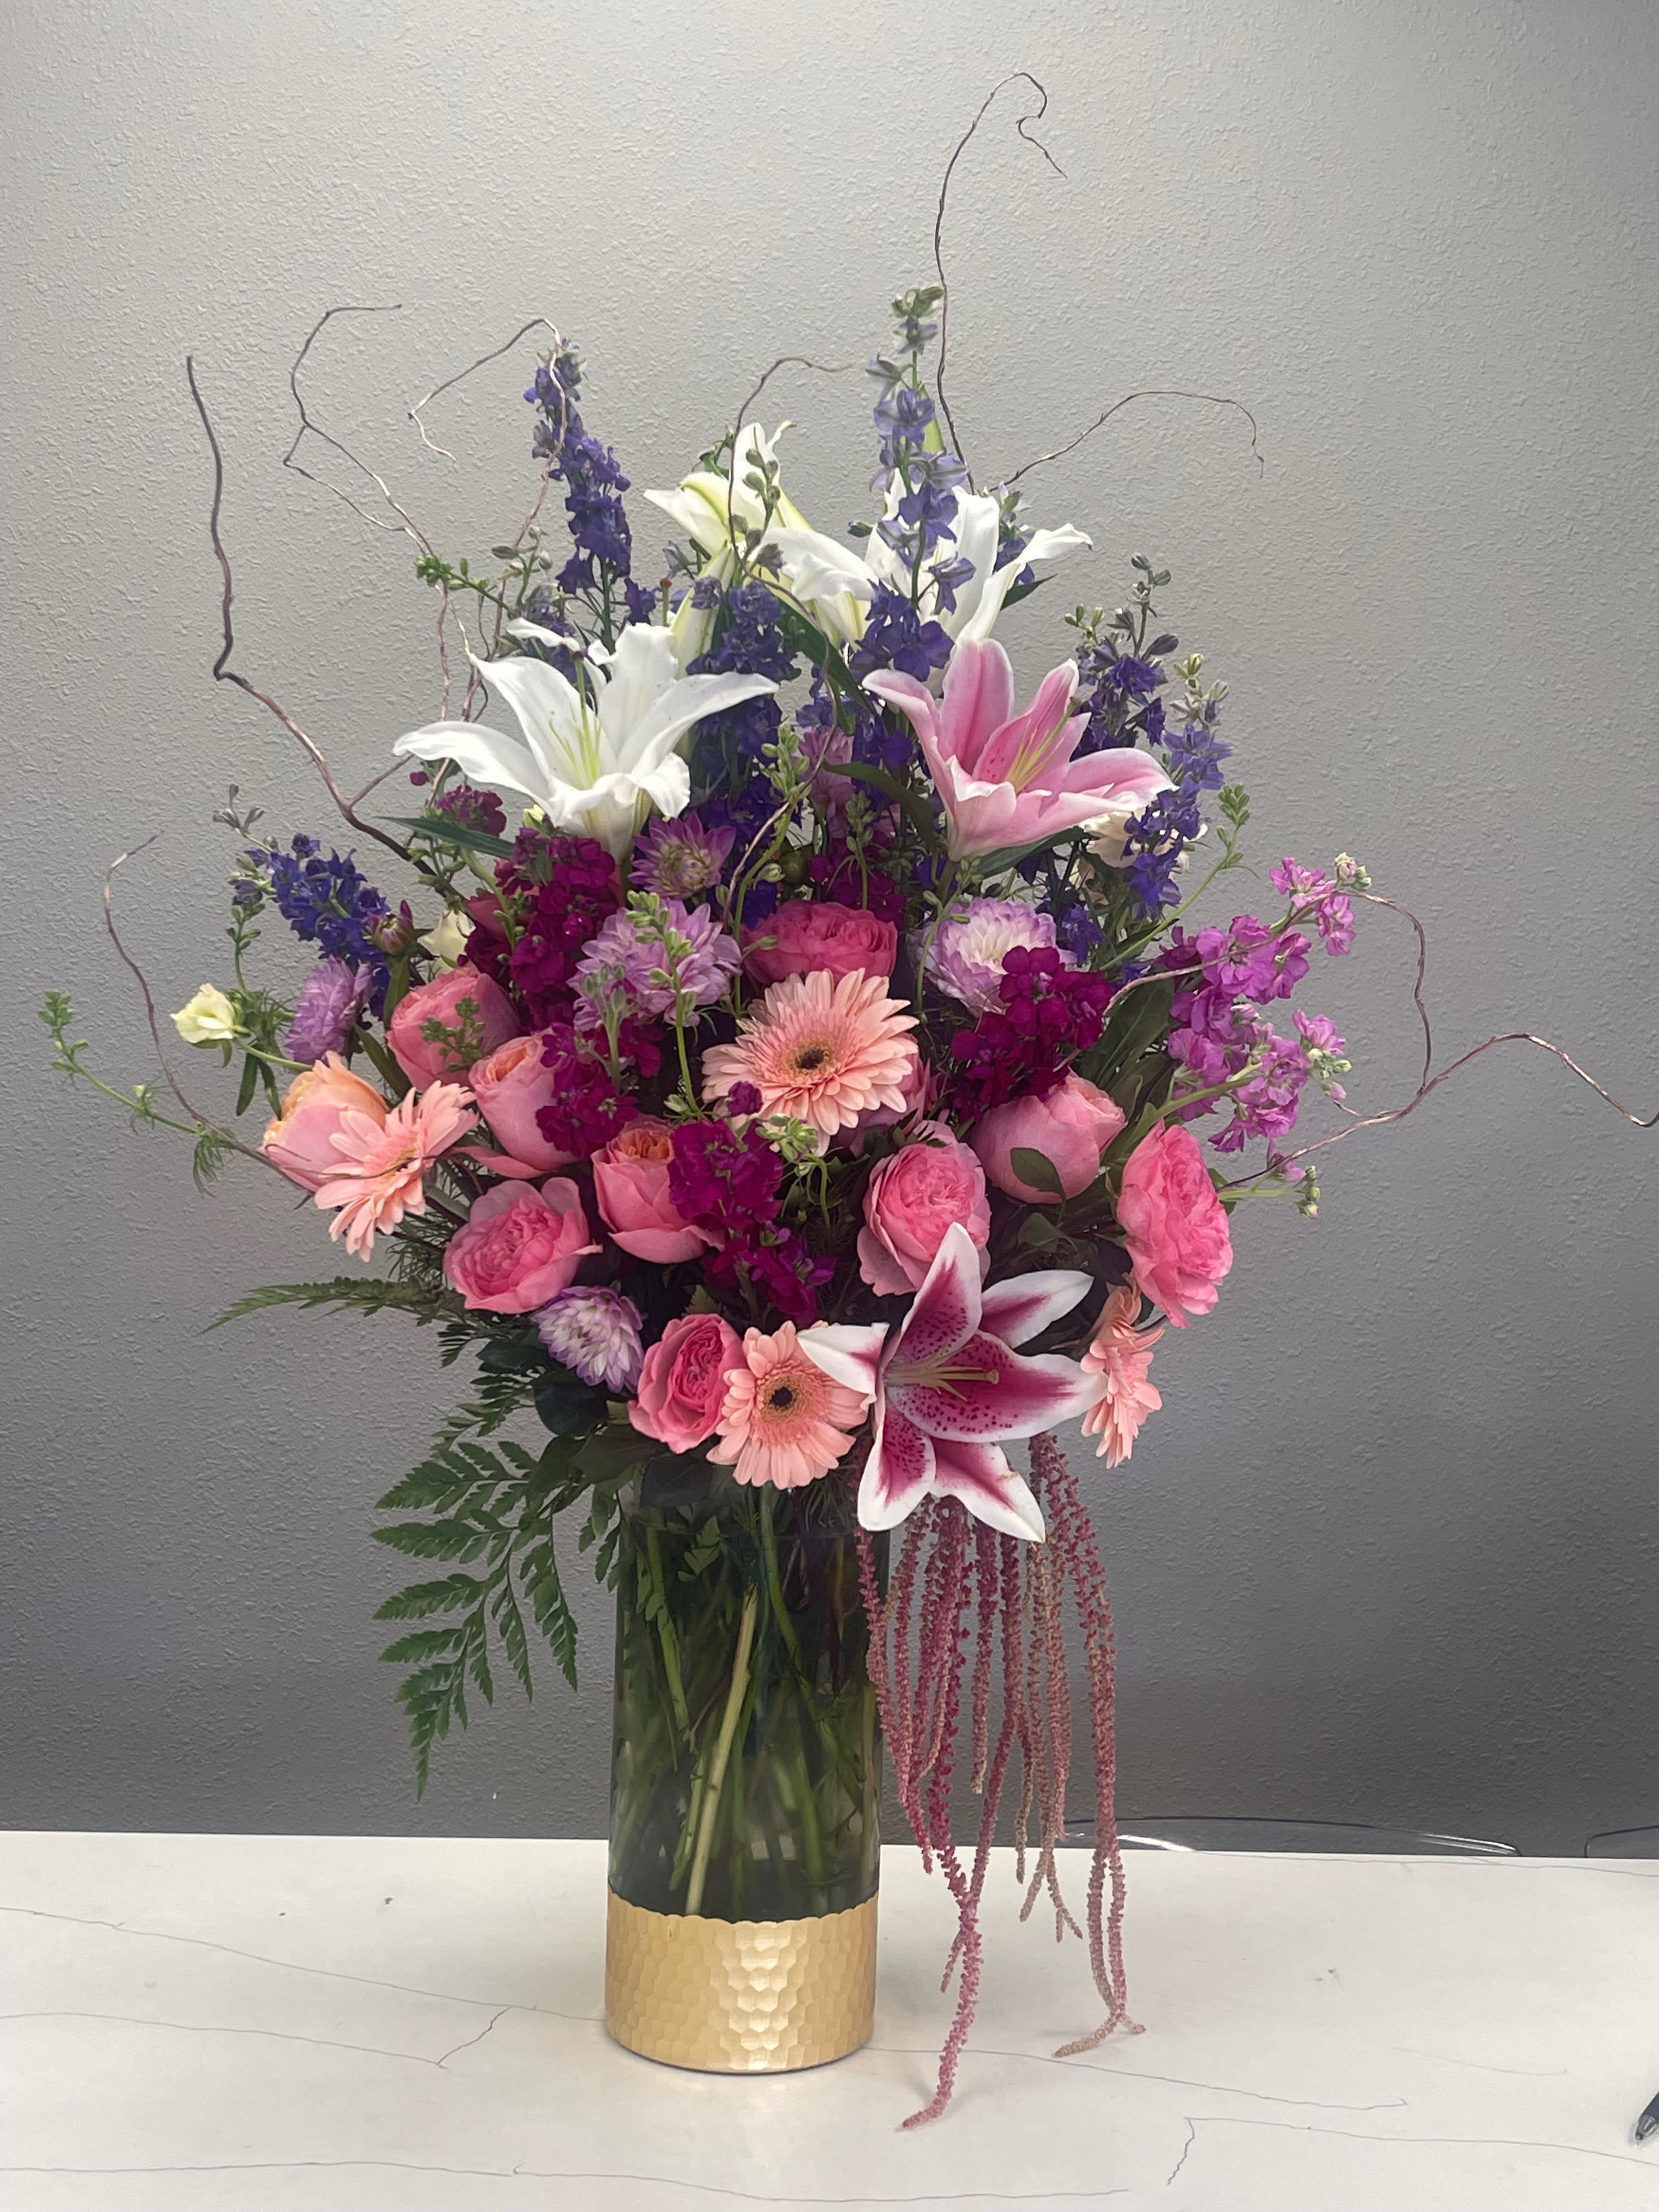 SIMPLY YOU - A FABULOUS COLLECTION OF PINK, LAVENDER, PURPLE FLOWERS MAKE THIS BOUQUET A PERFECT GIFT FOR HER.